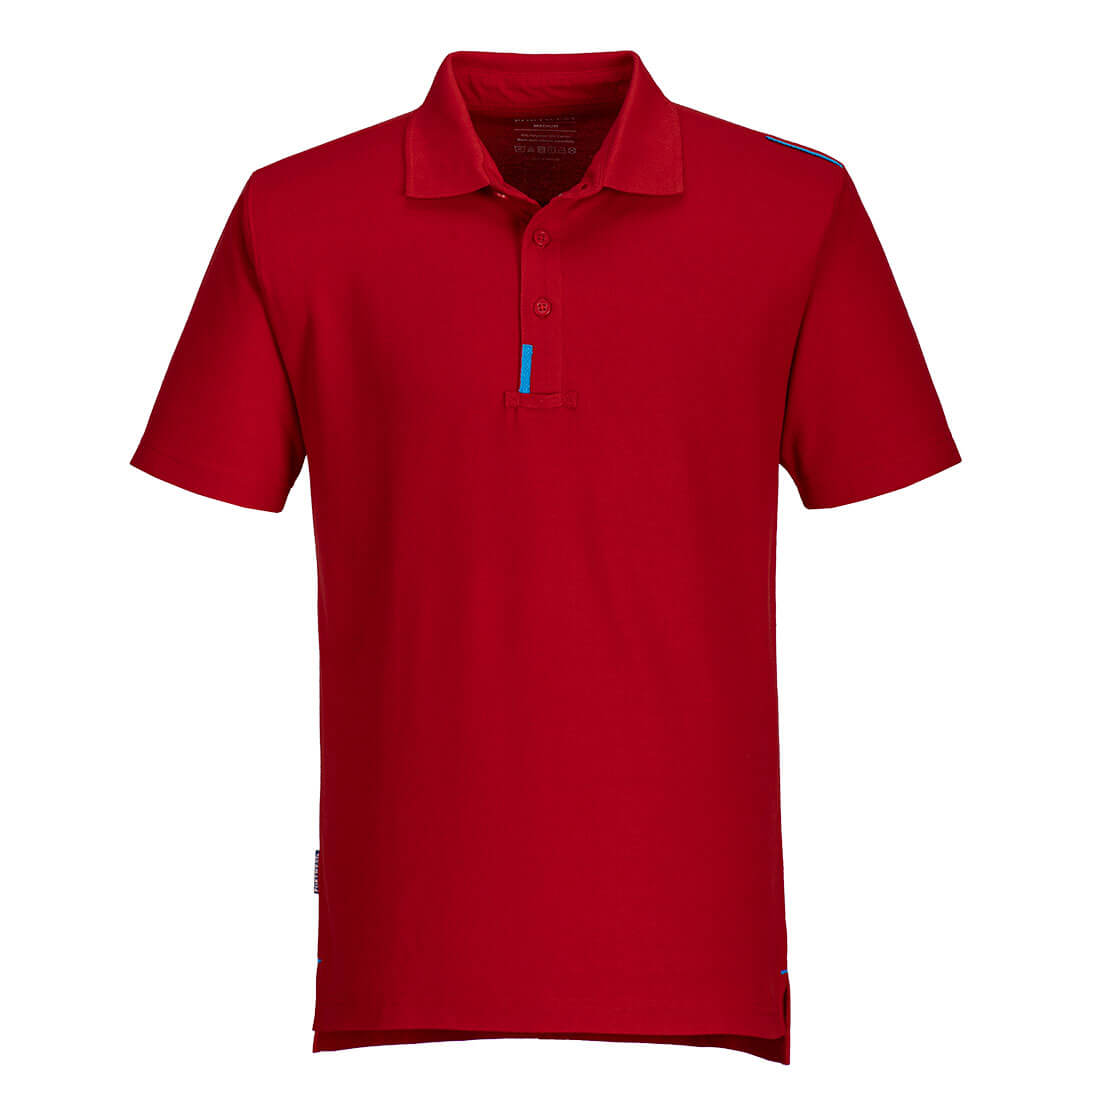 WX3 Polo Shirt T720 Deep Red Size M Fit R